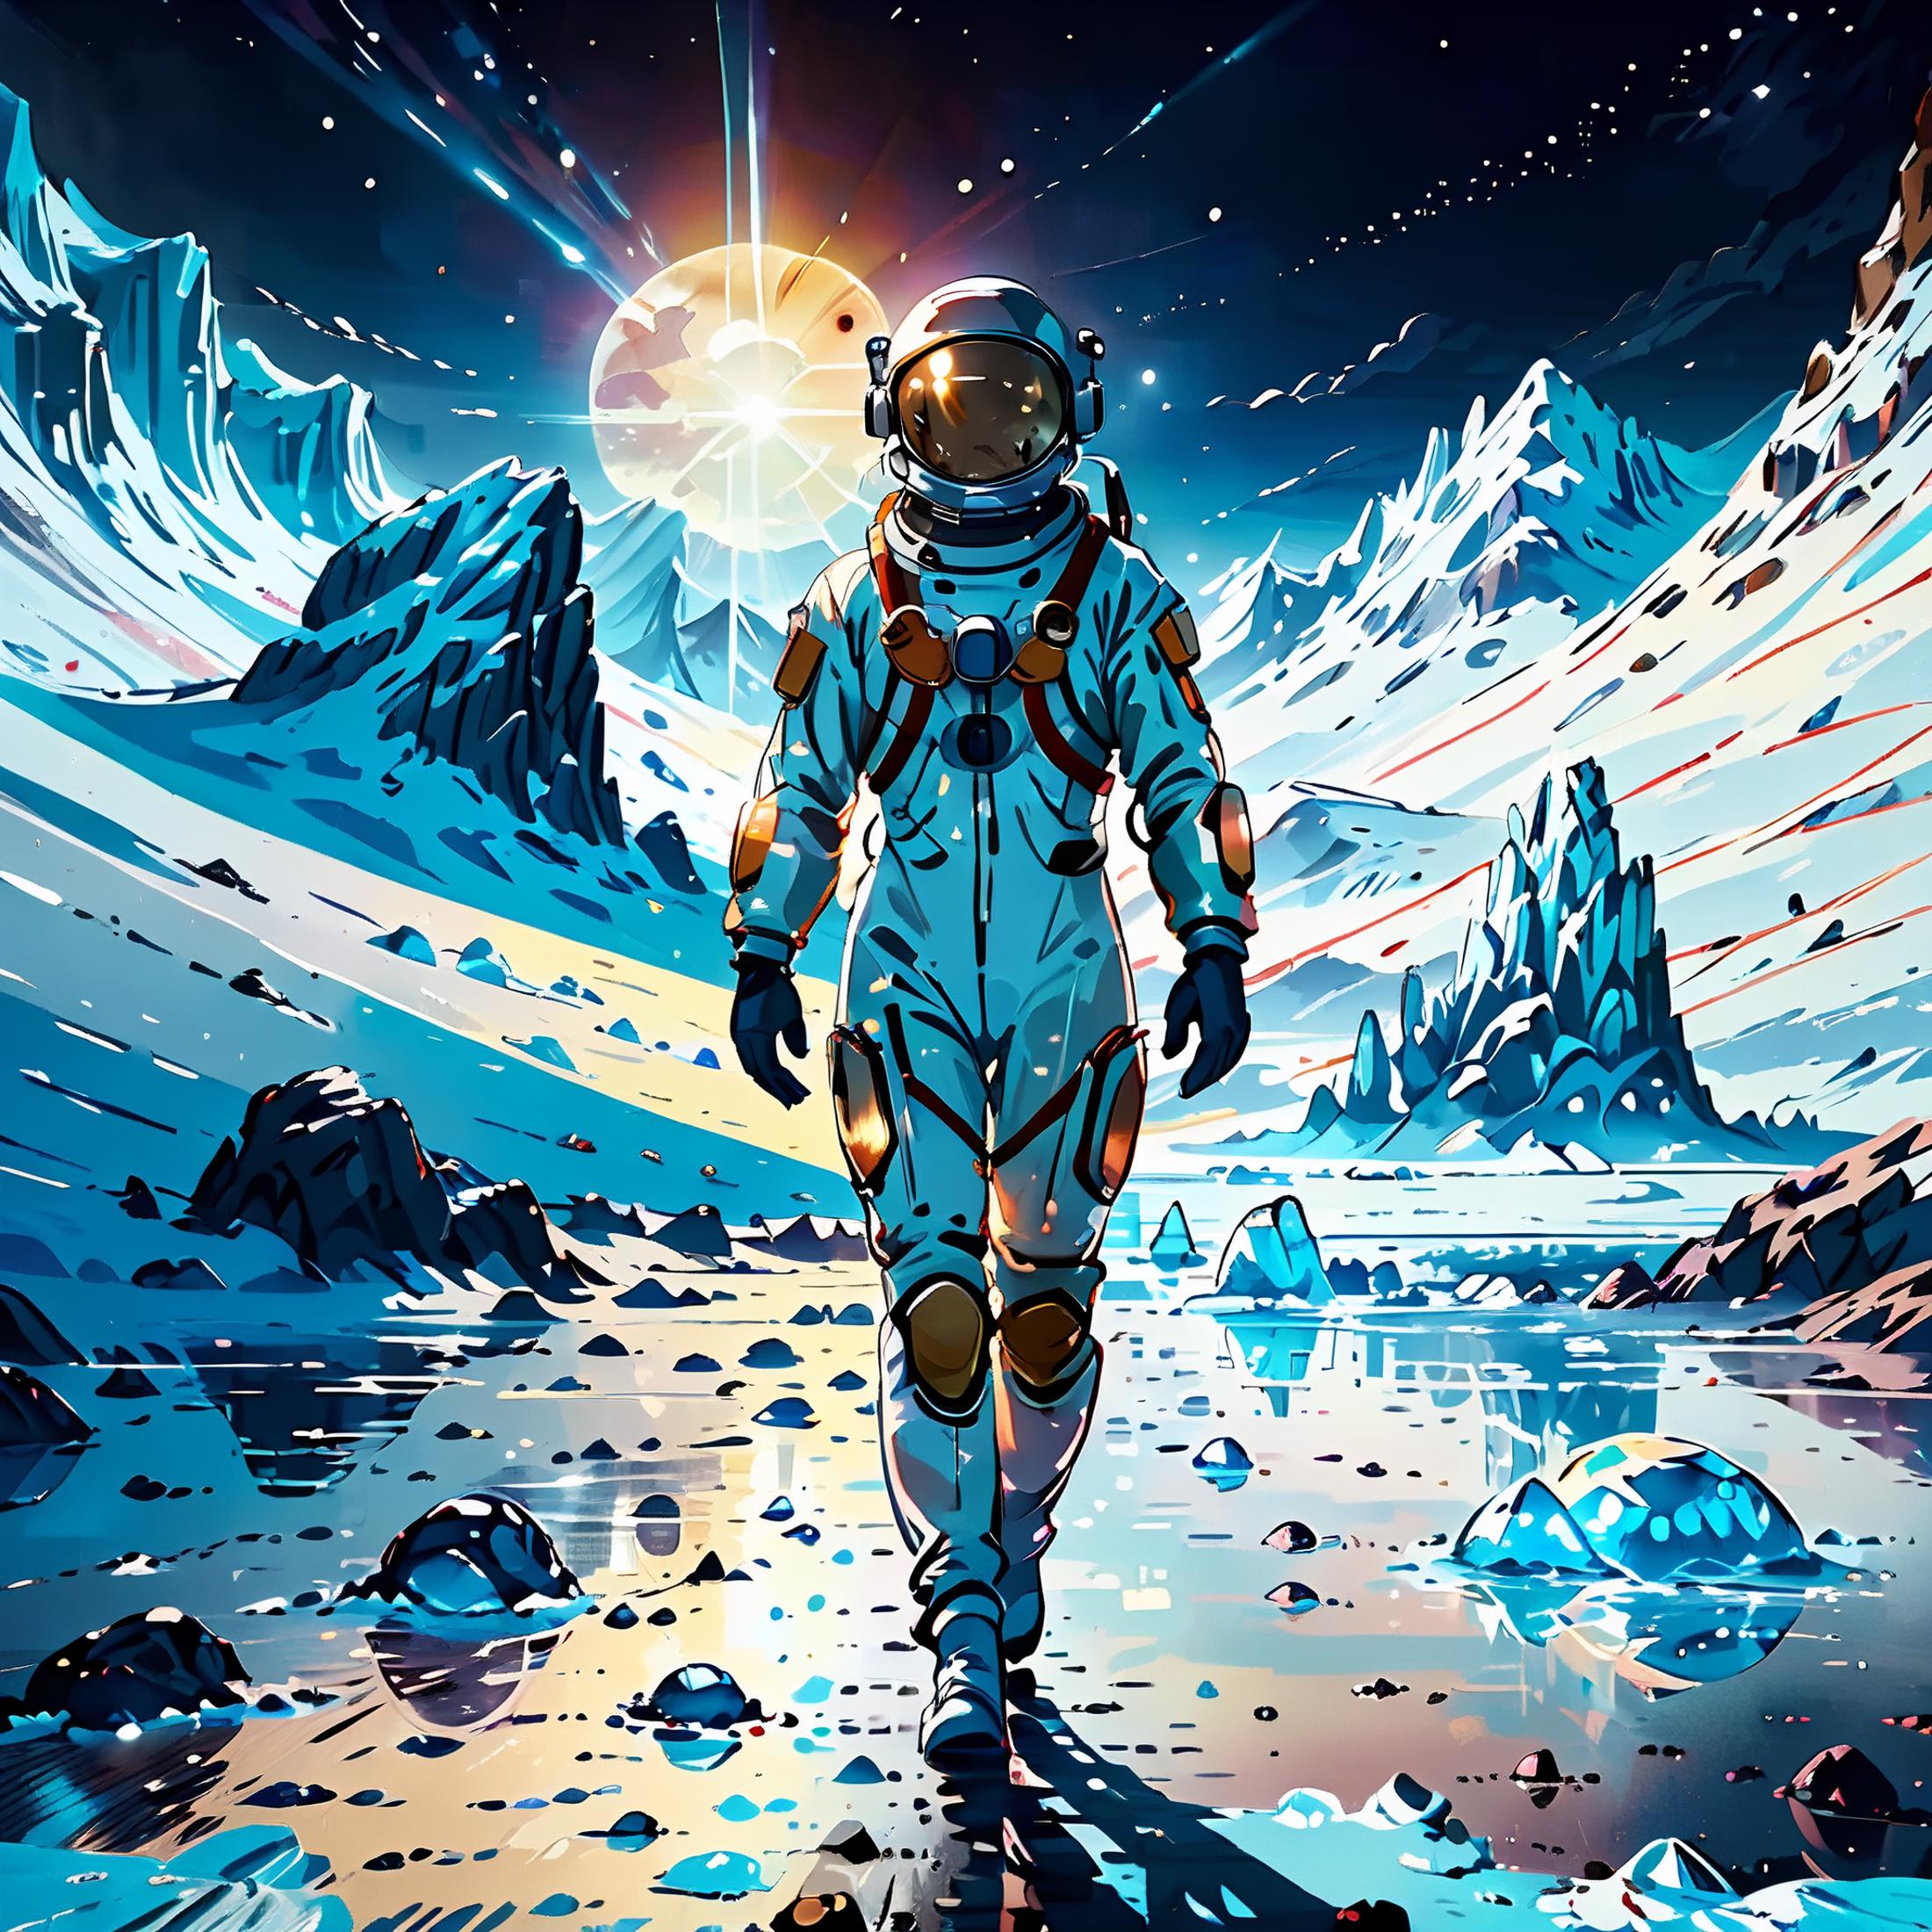 Astronaut walking on a rocky surface.